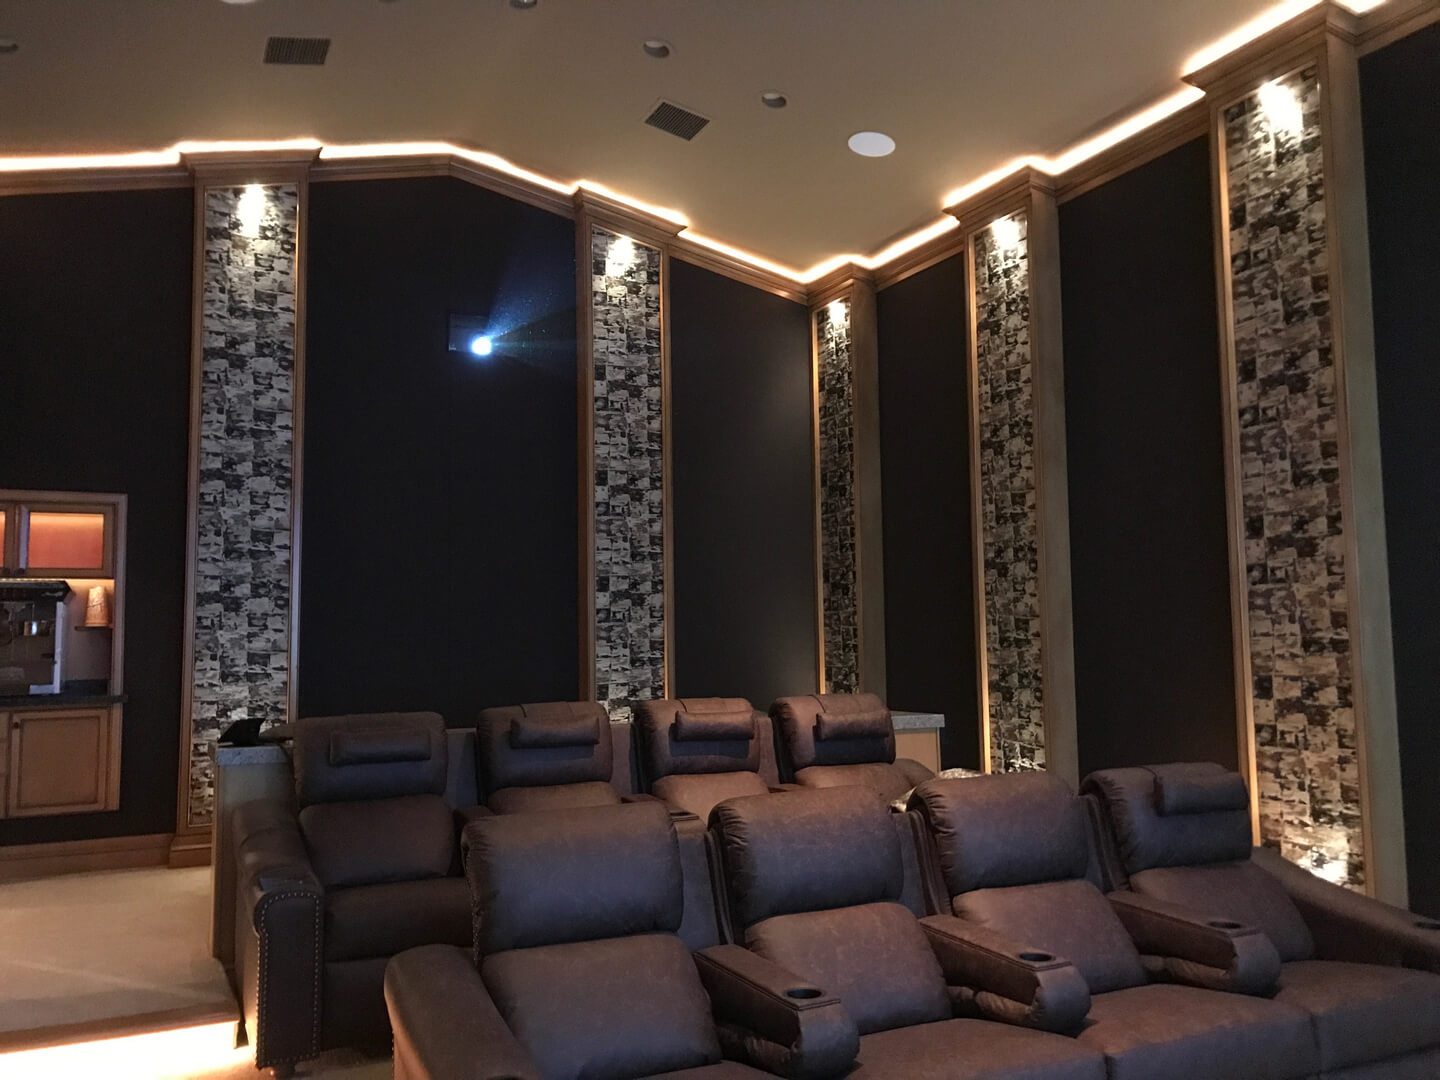 A room with several seats and lights in it